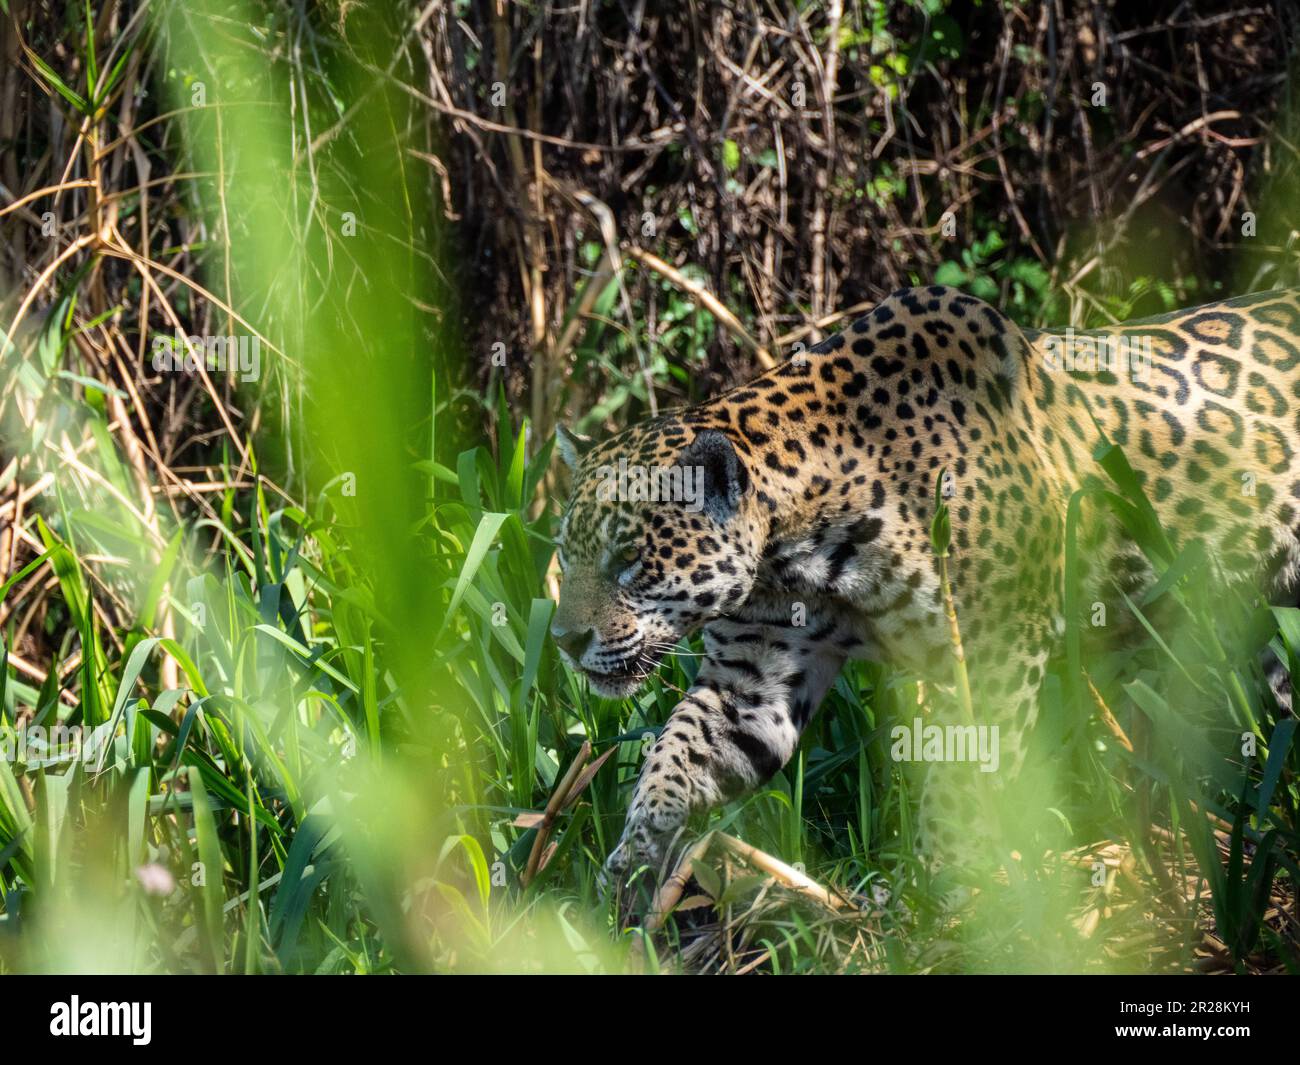 A stealthy jaguar traverses the lush landscapes of Pantanal, Brazil, symbolizing the untamed essence of the region's wildlife. Stock Photo